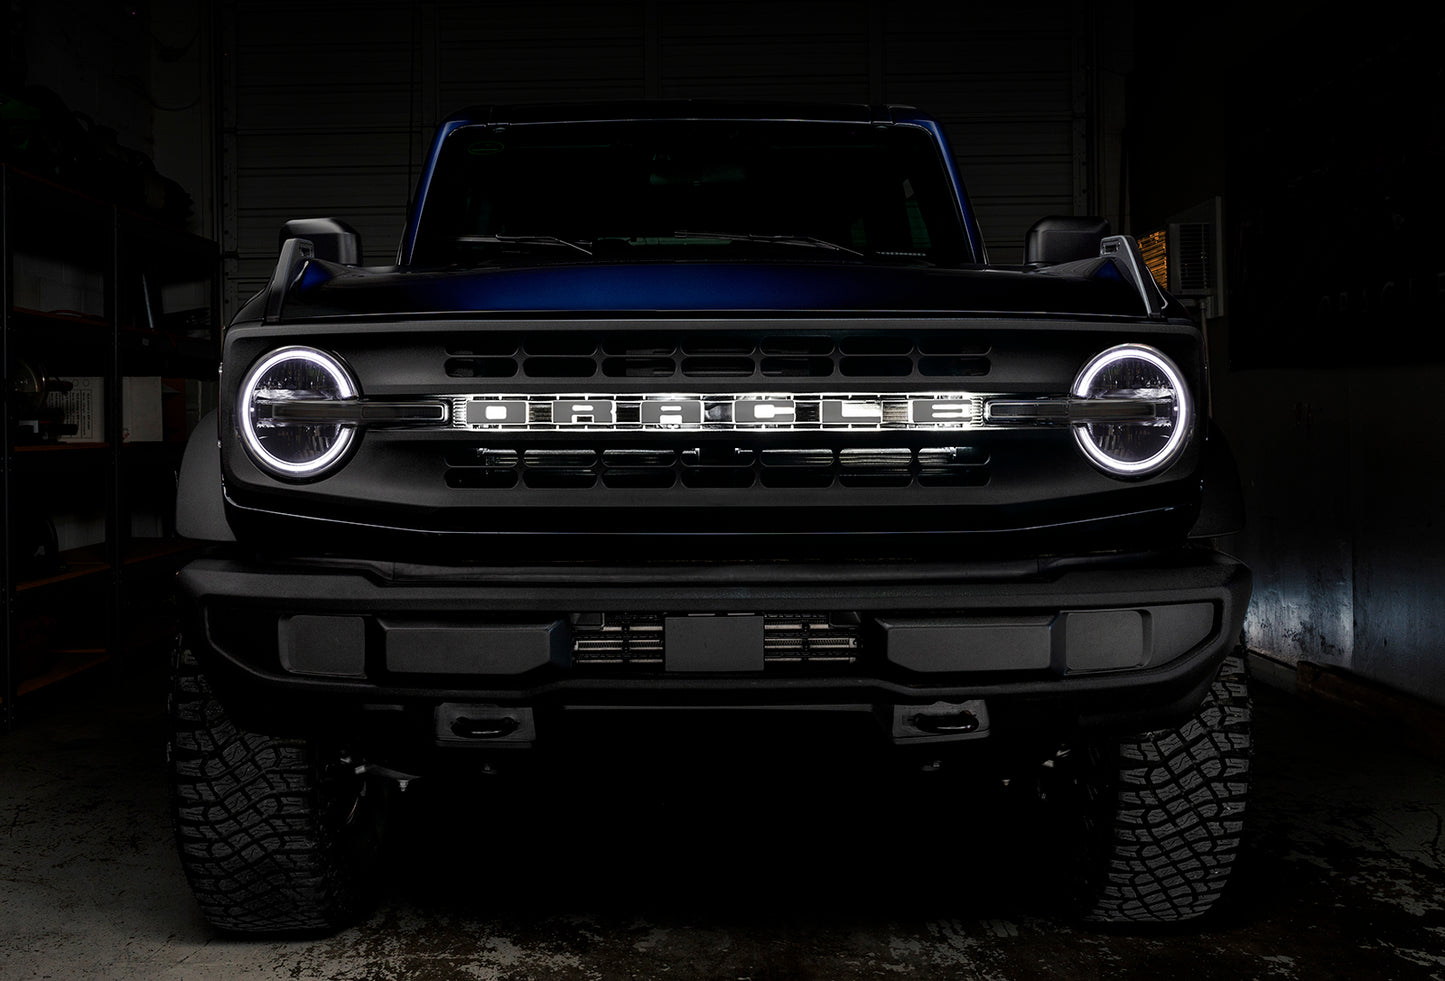 ORACLE Lighting 1468-333 Fits Ford Bronco ColorSHIFT® RGB+W Headlight Halo Upgrade Kit